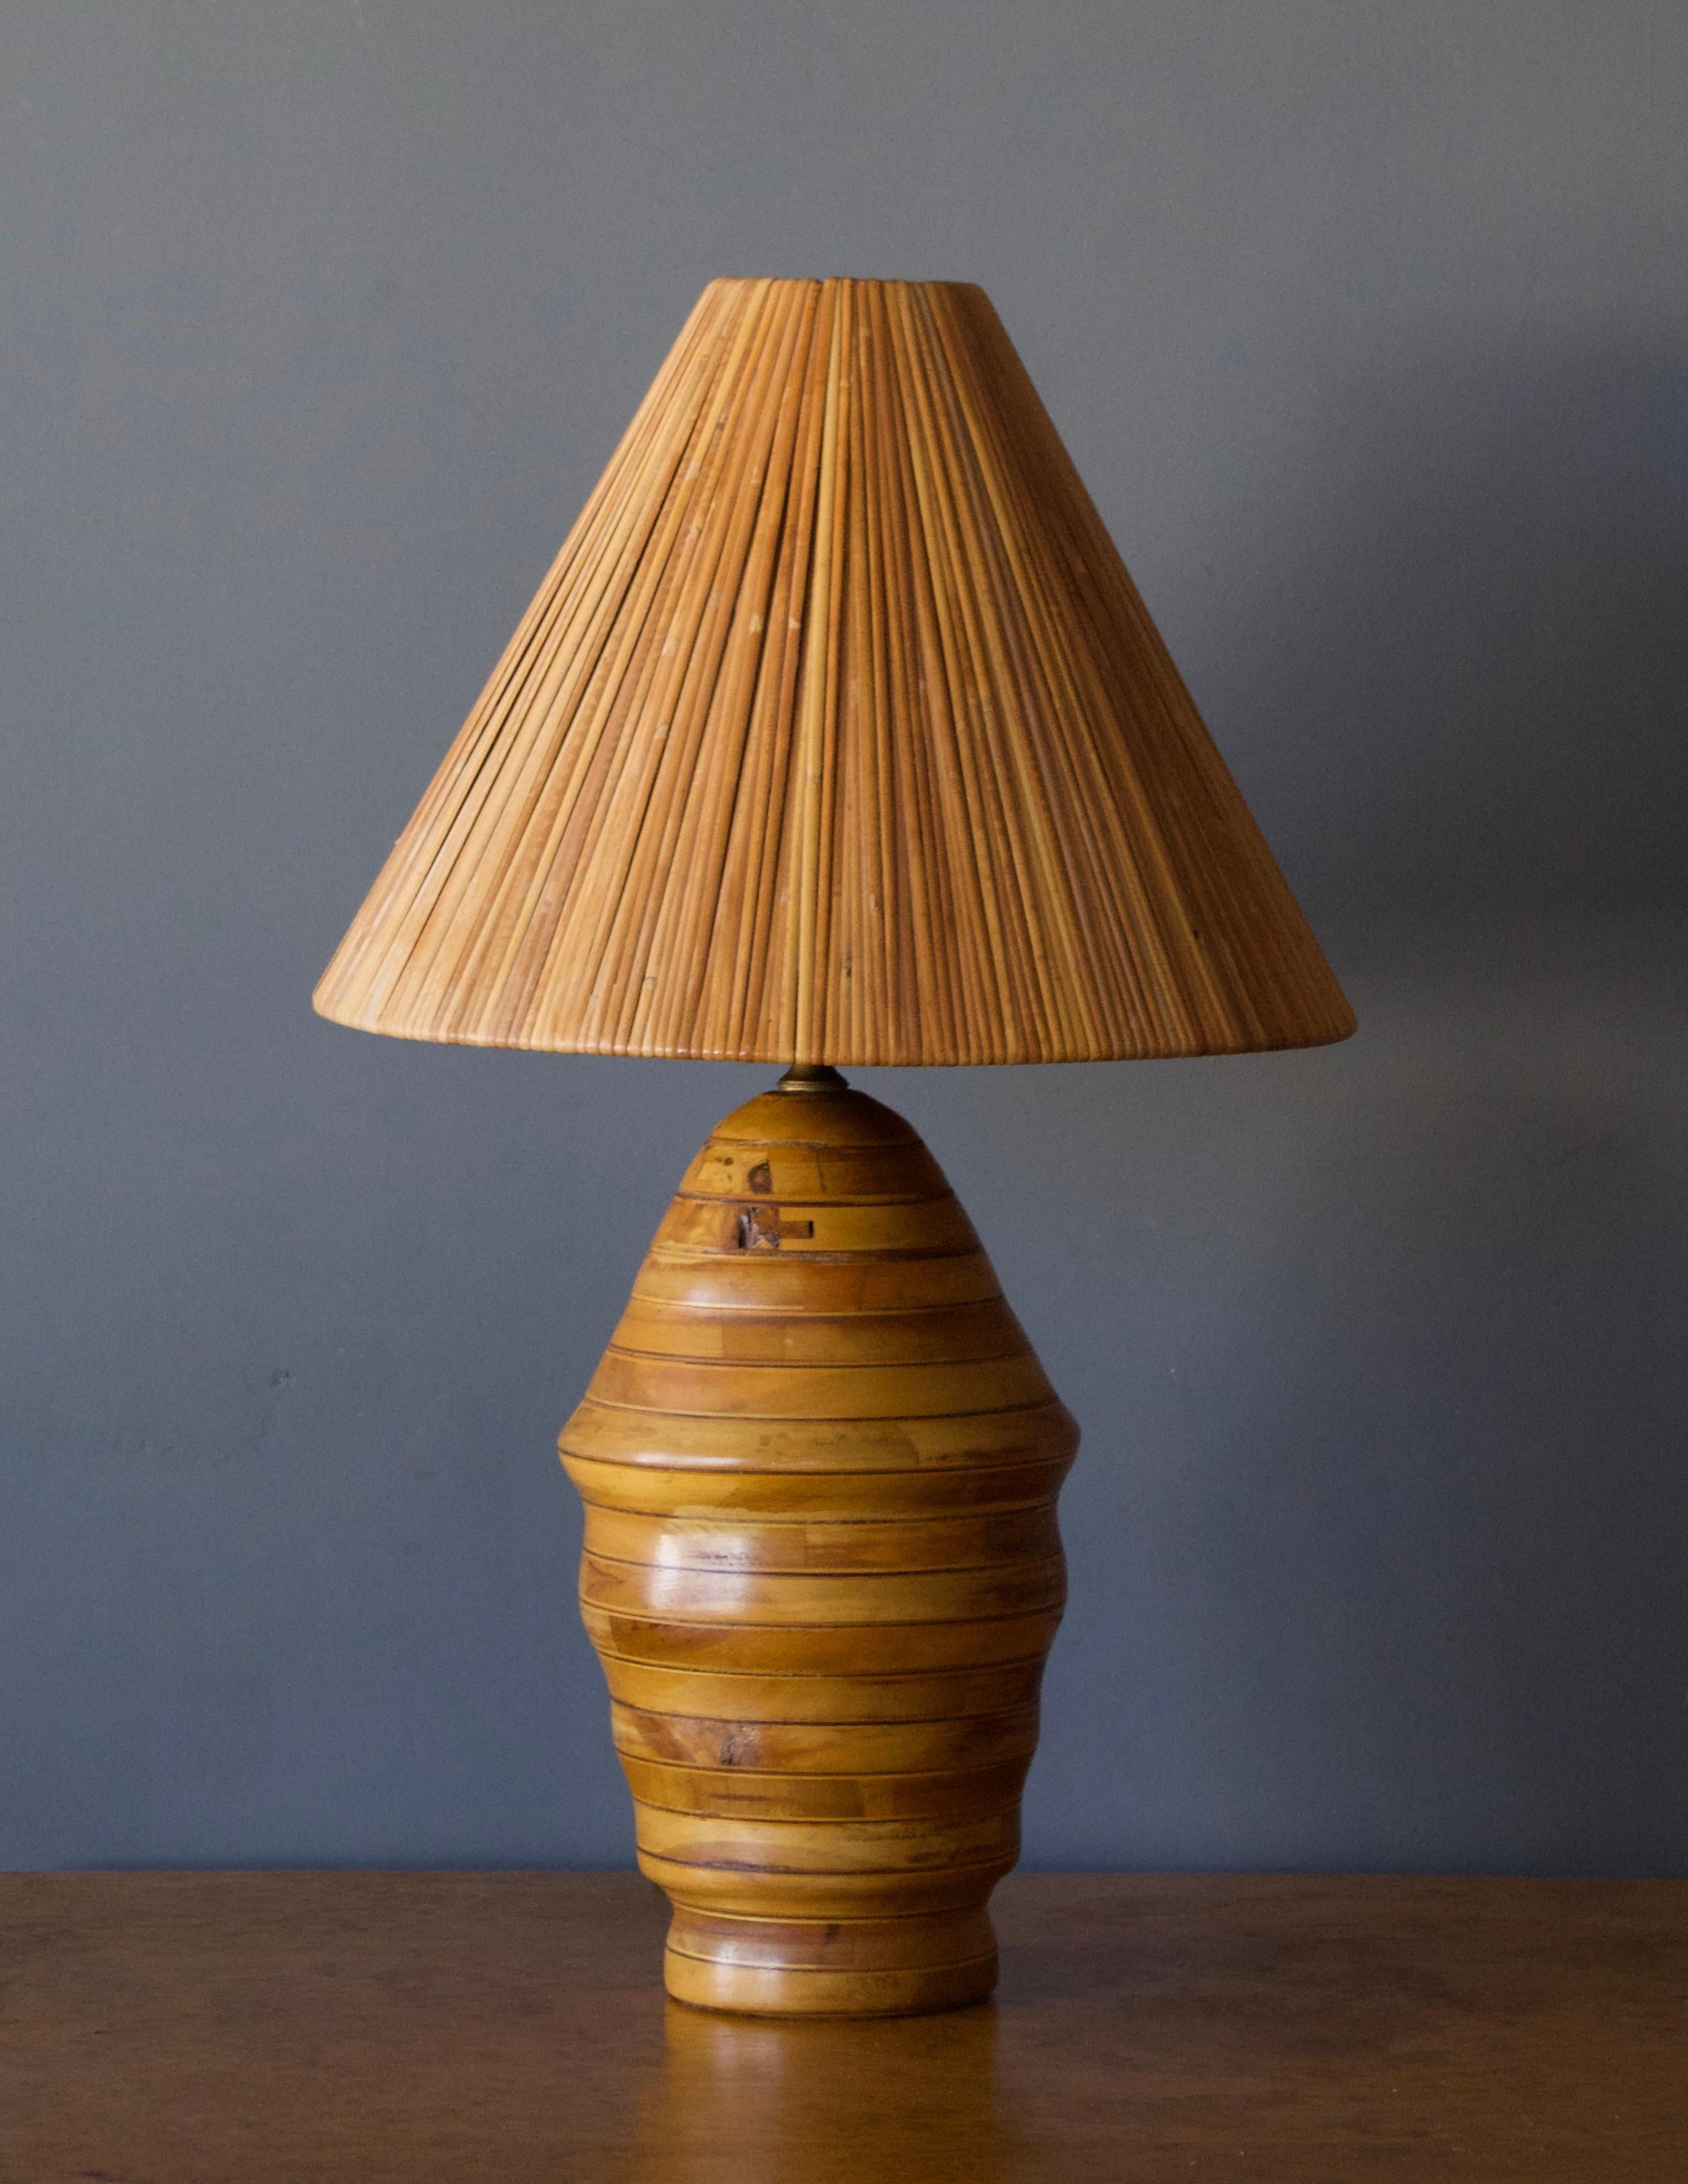 A table lamp. In finely carved oak in abstract form. Designed and produced by unknown studio craftsman. Presents with beautiful original patina to wood and brass.

Sold with lampshade. Stated dimensions including lampshade as is